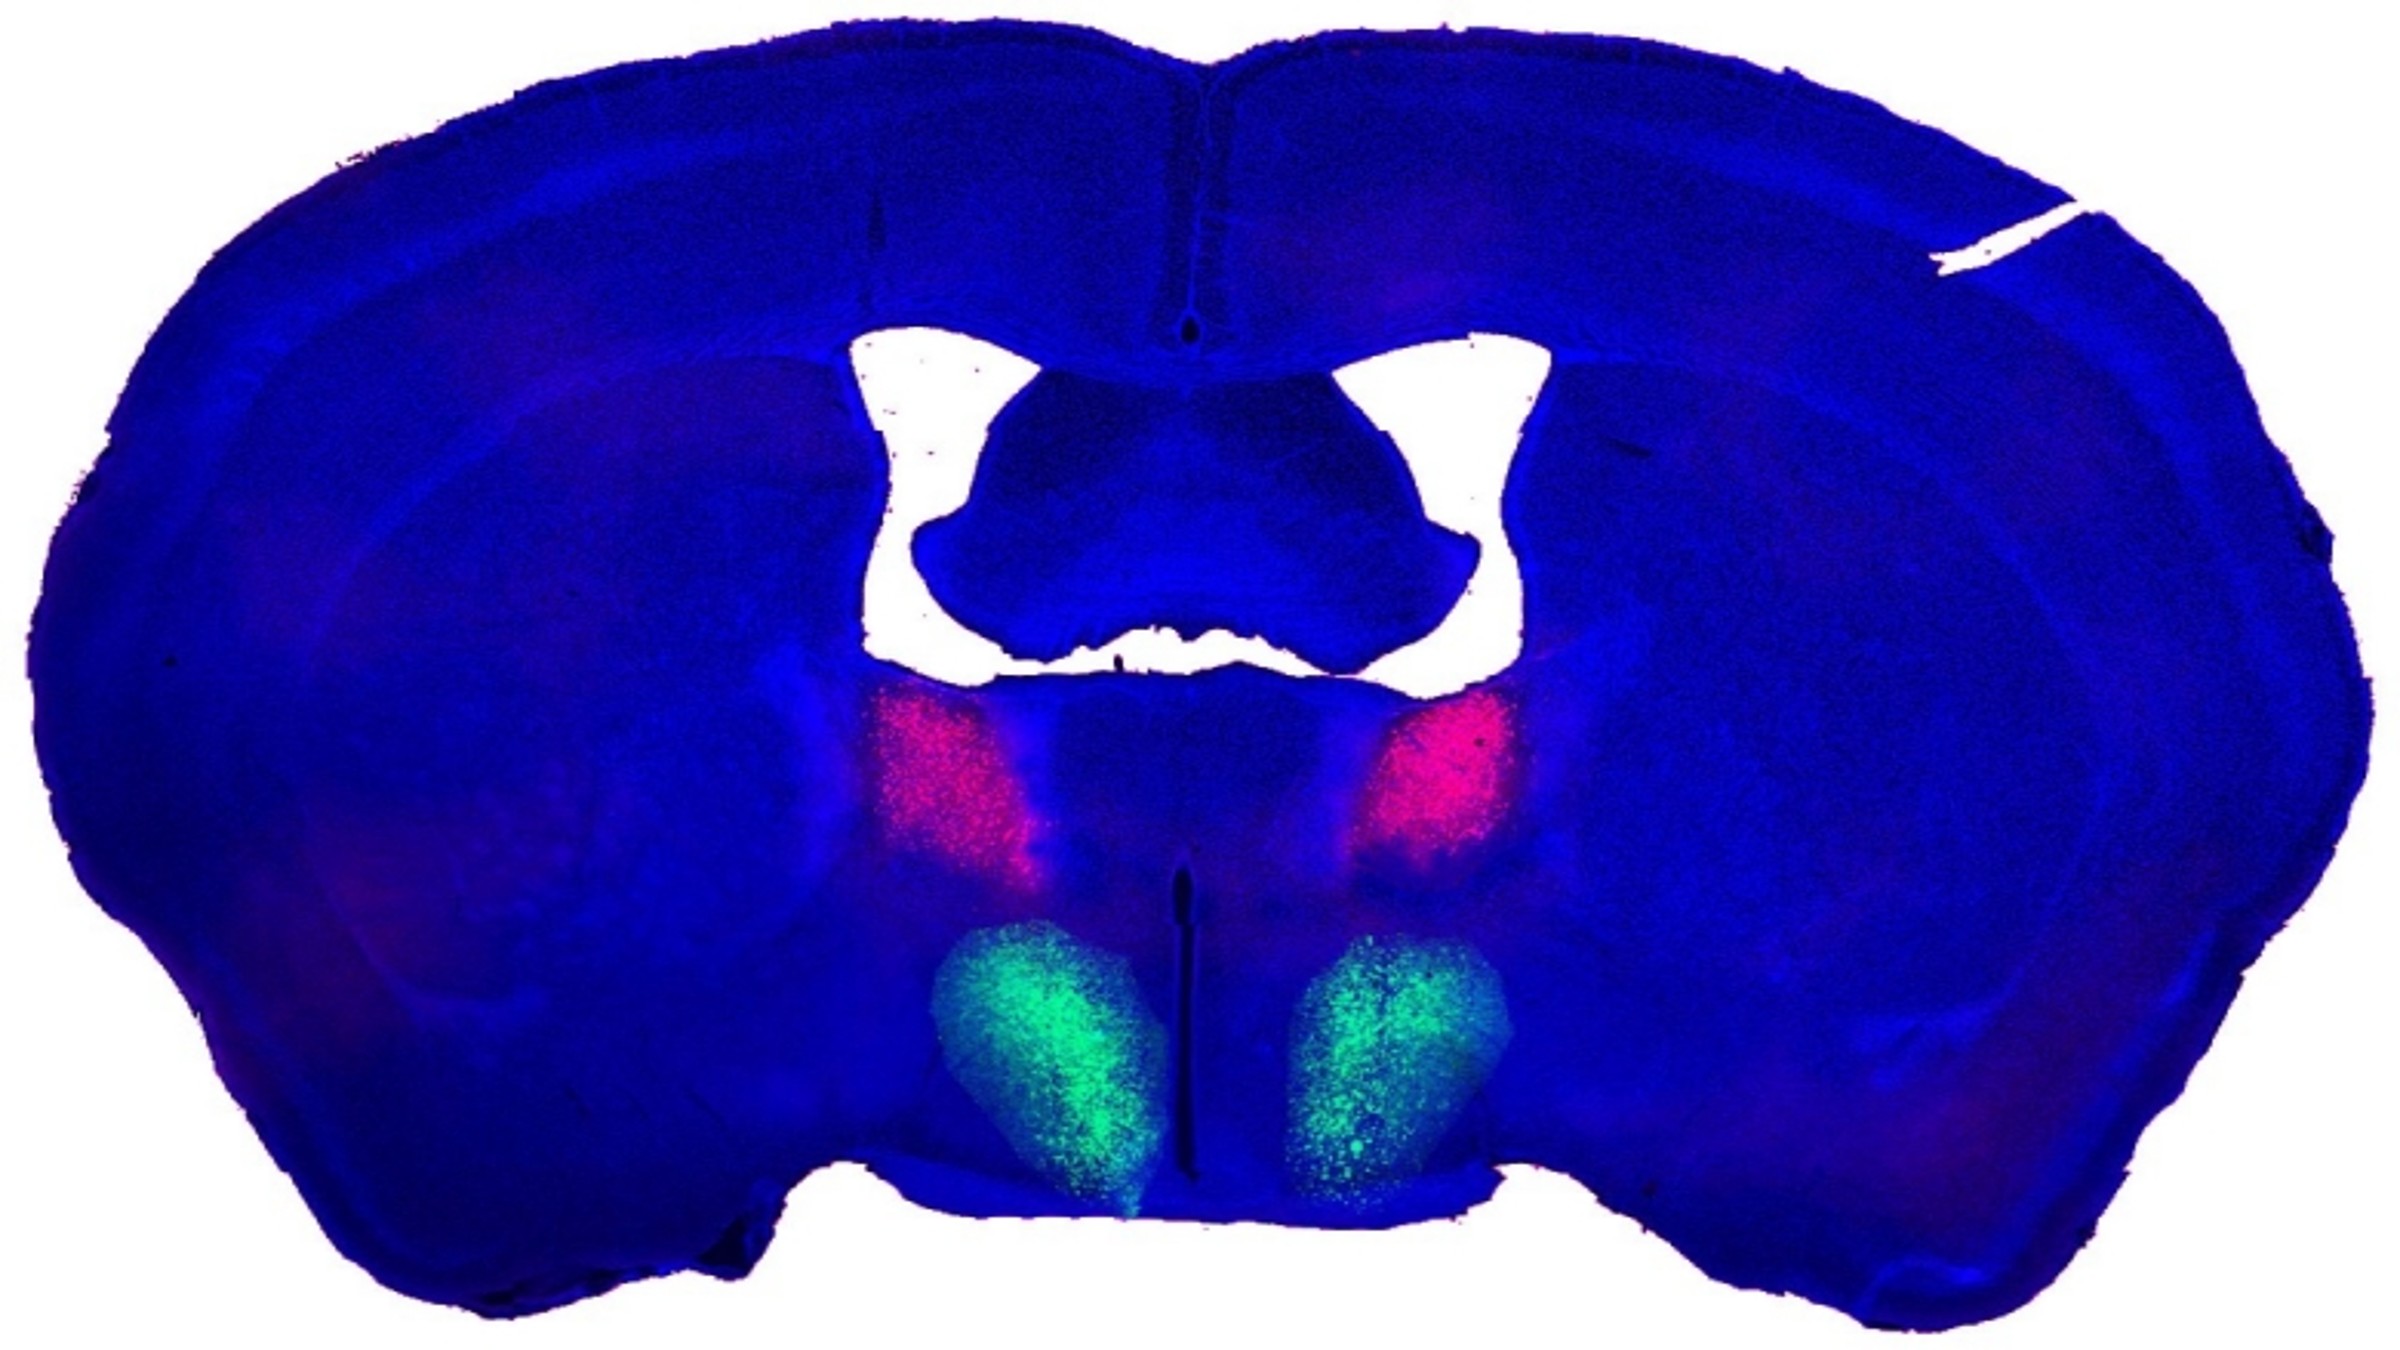 Composite image of the male mouse brain showing the preoptic hypothalamus and the bed nucleus of the stria terminalis